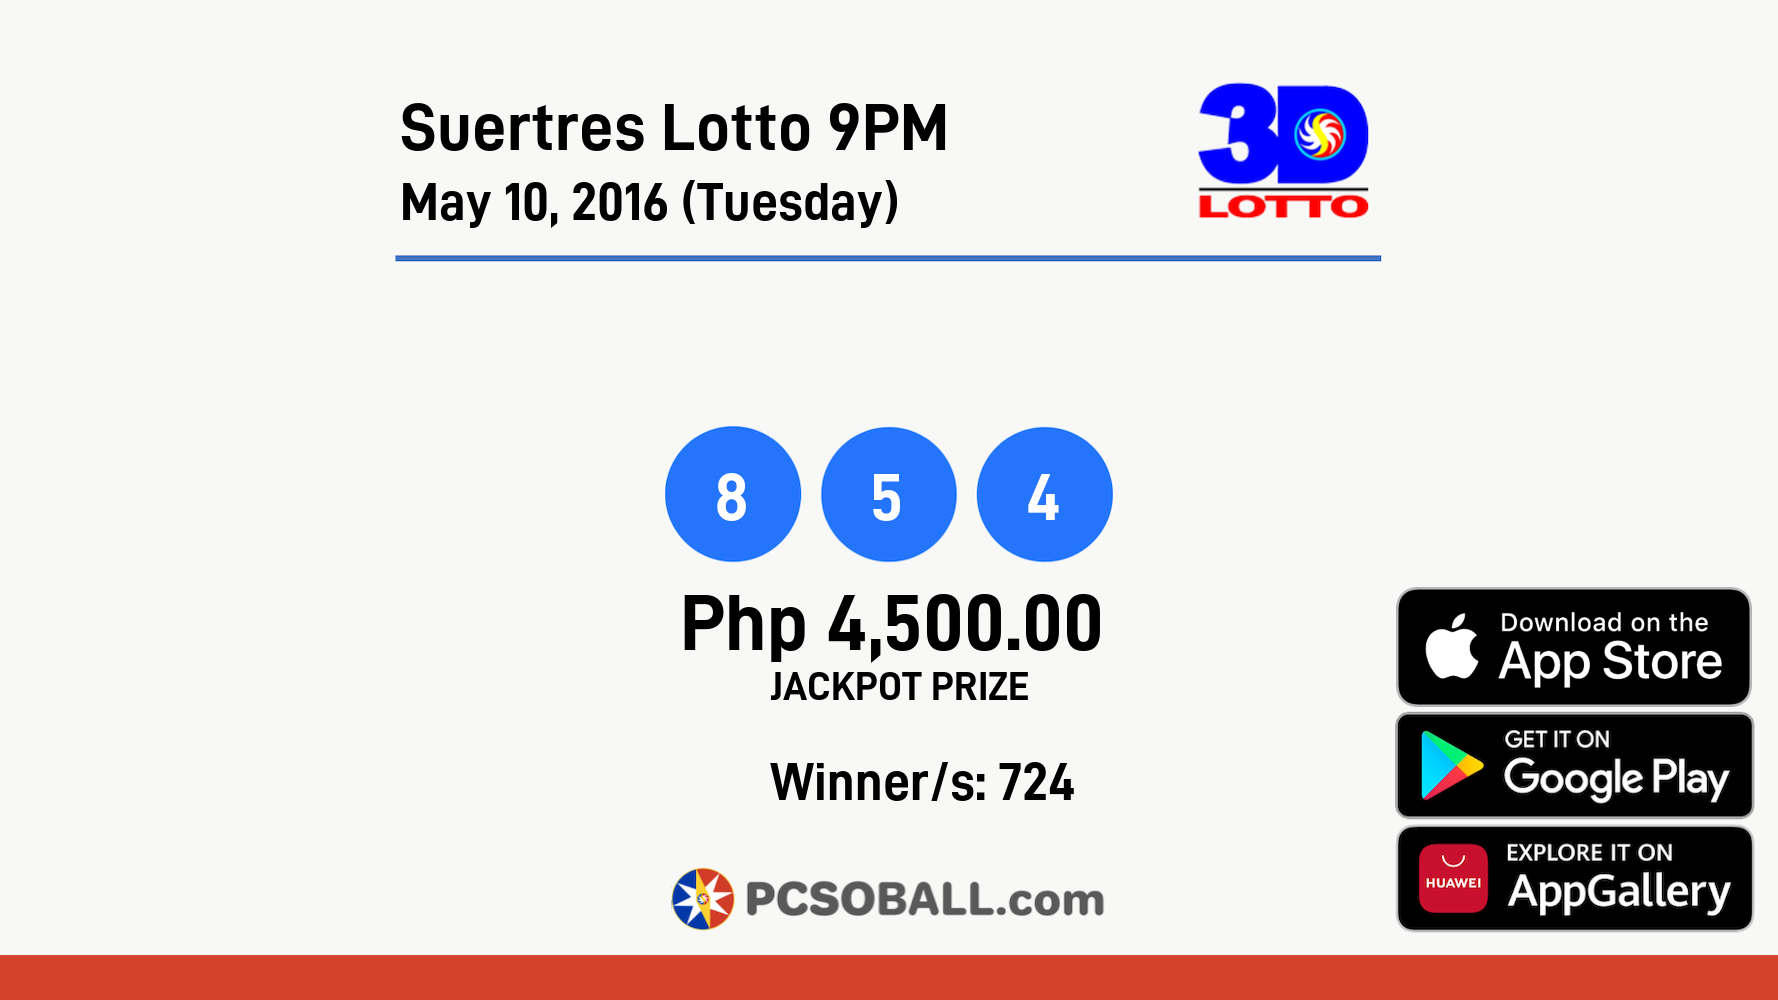 Suertres Lotto 9PM May 10, 2016 (Tuesday) Result